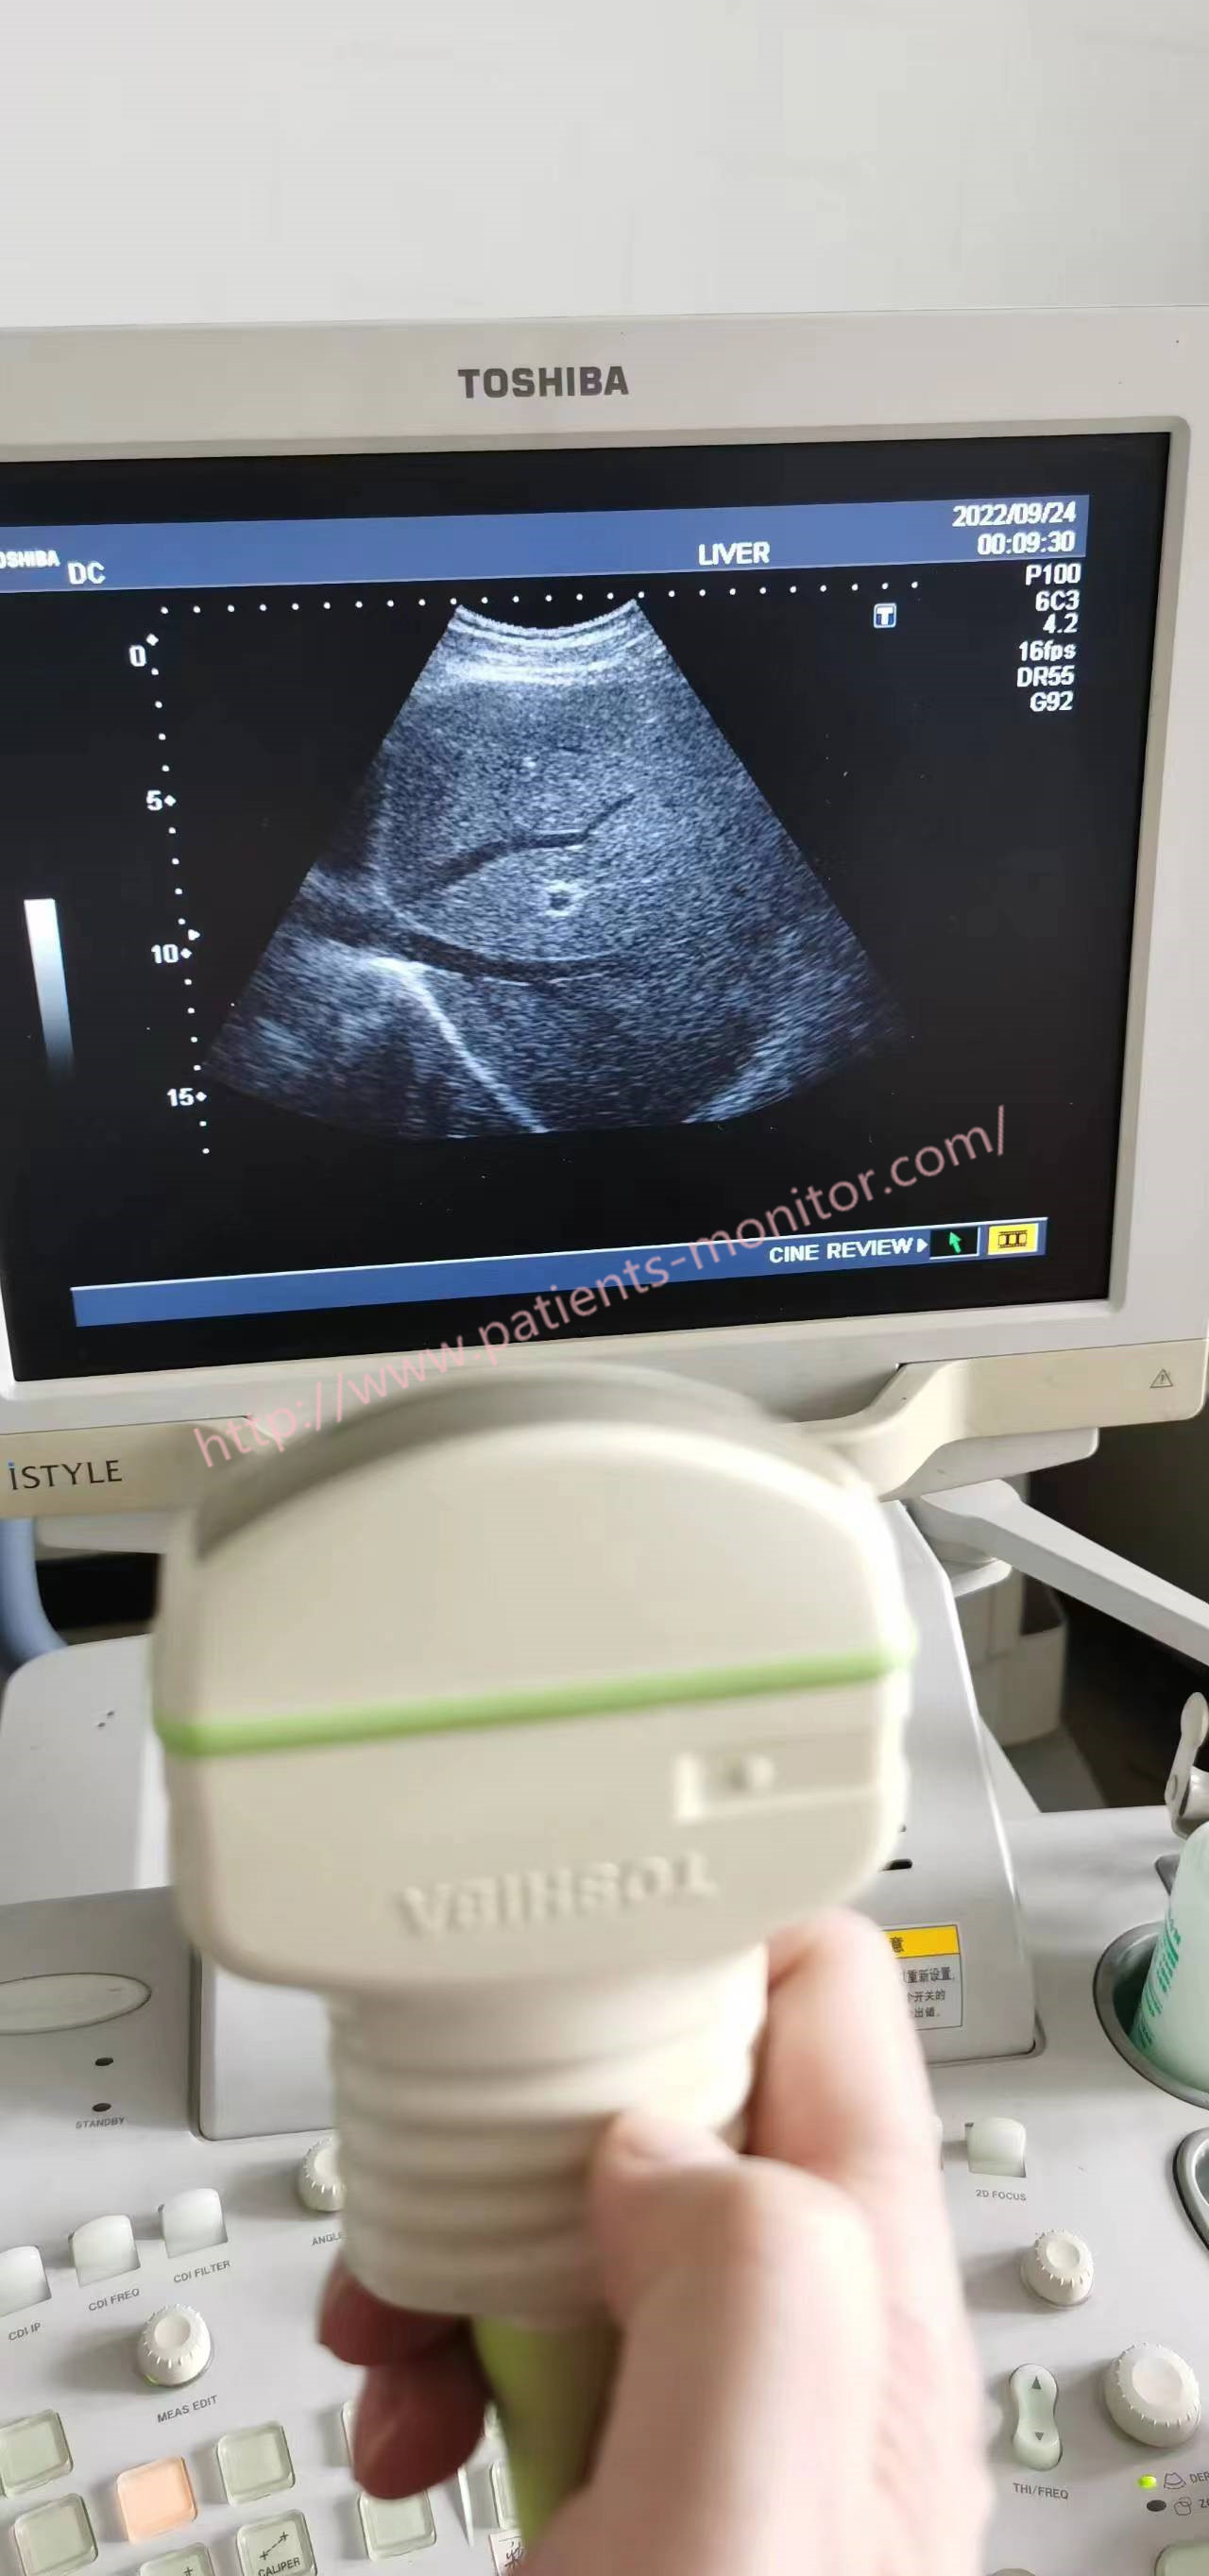  Toshiba PVM-375AT Convex Array Transducer Ultrasound Probe 3.0MHz. - 6.0MHz Manufactures